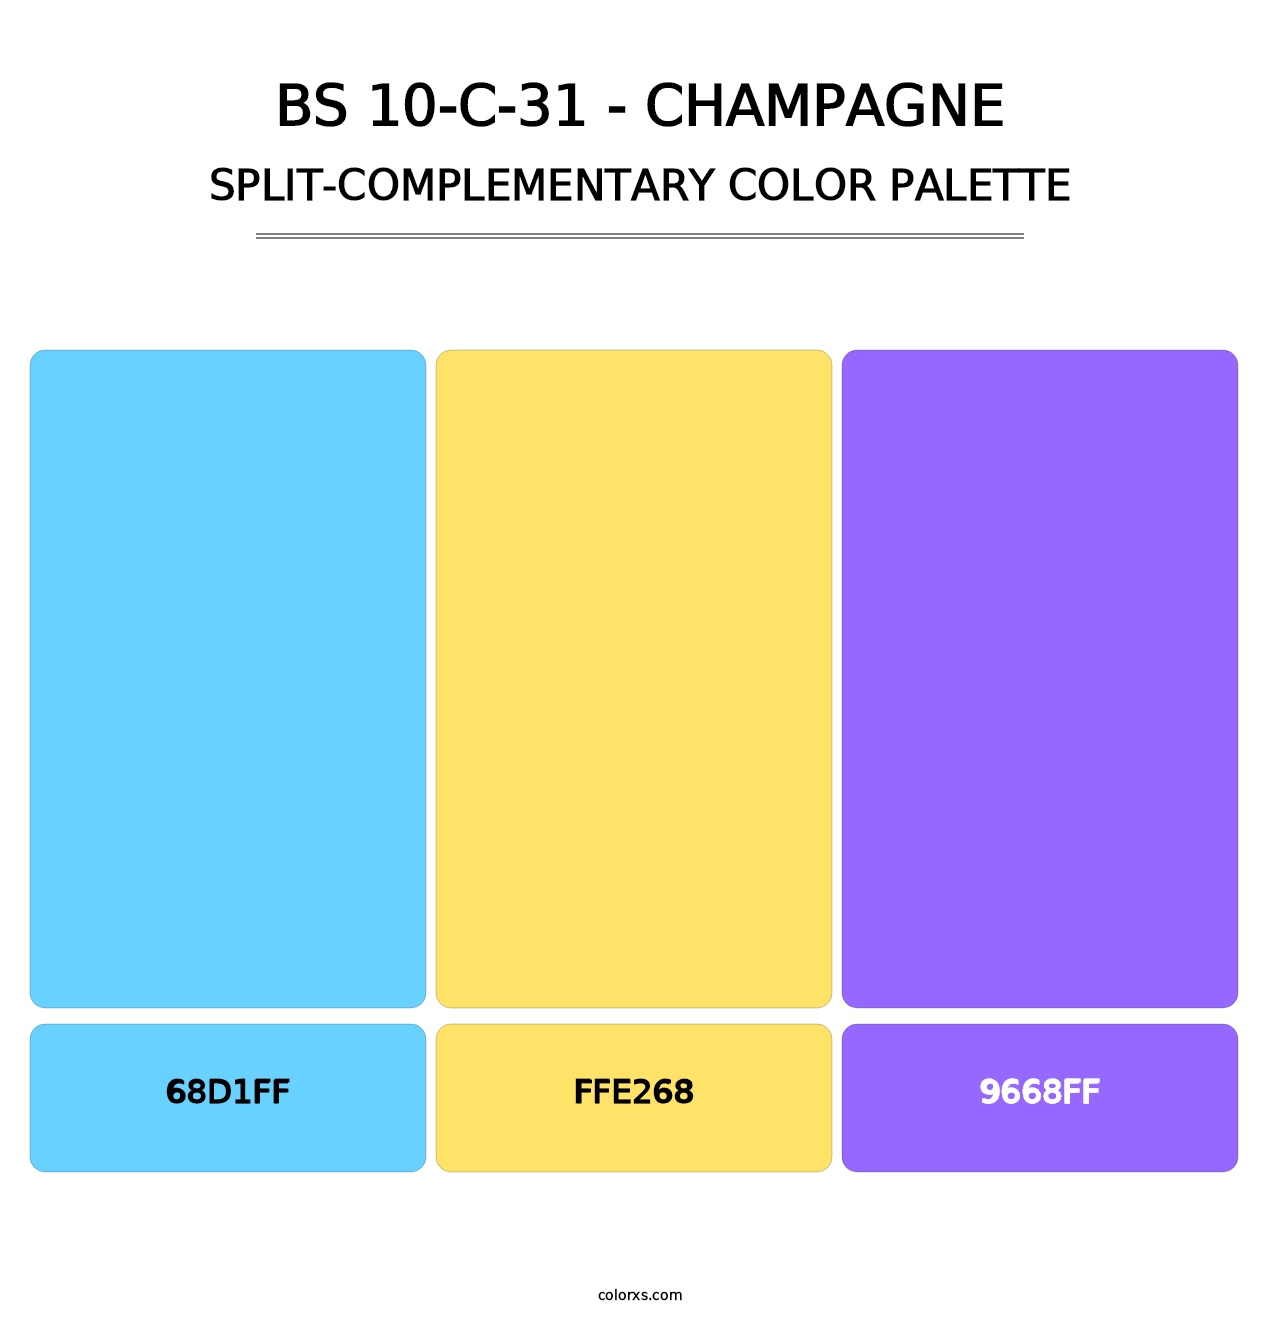 BS 10-C-31 - Champagne - Split-Complementary Color Palette